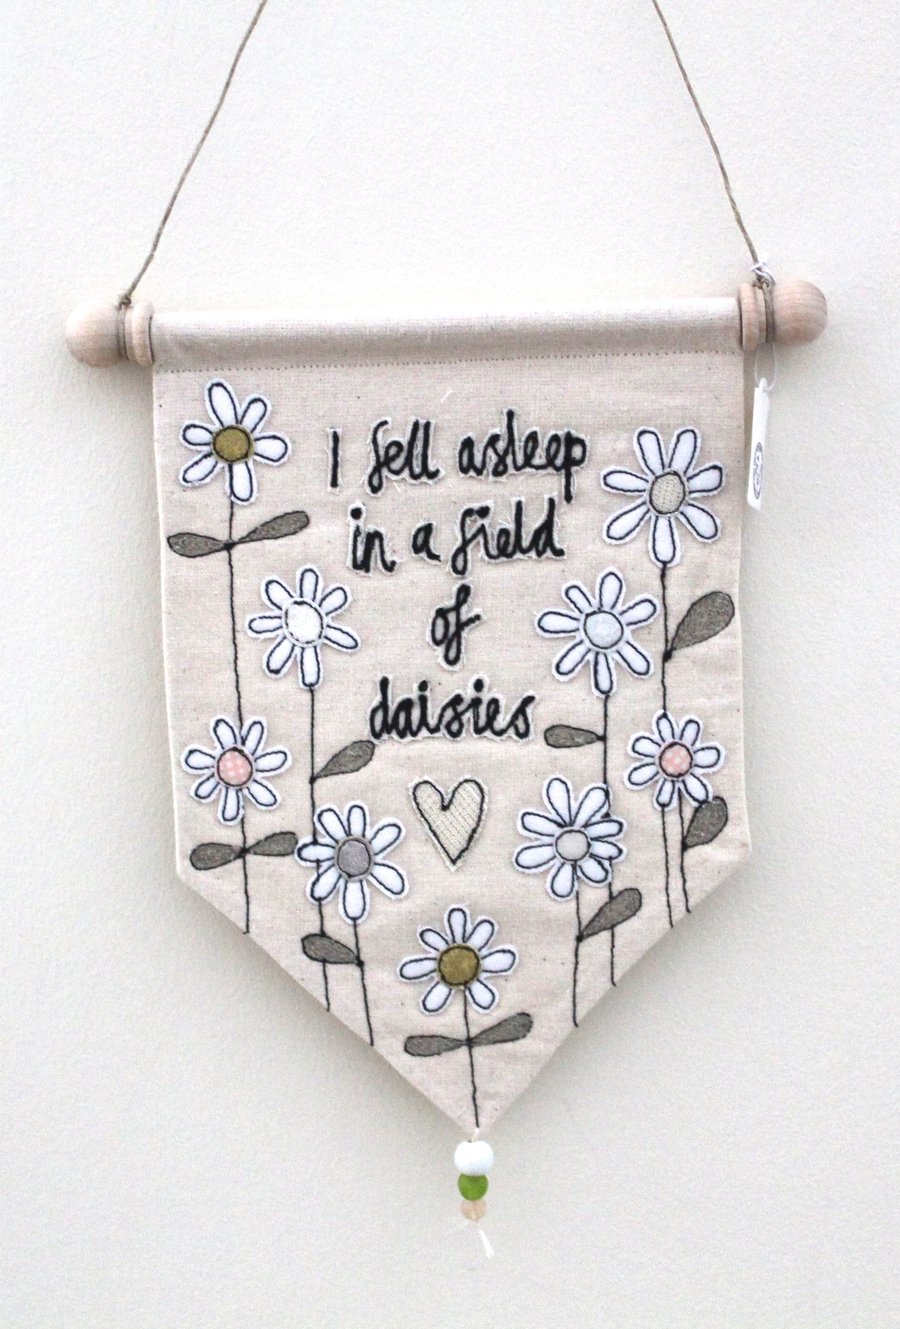 'I fell asleep in a field of daisies' Textile Banner